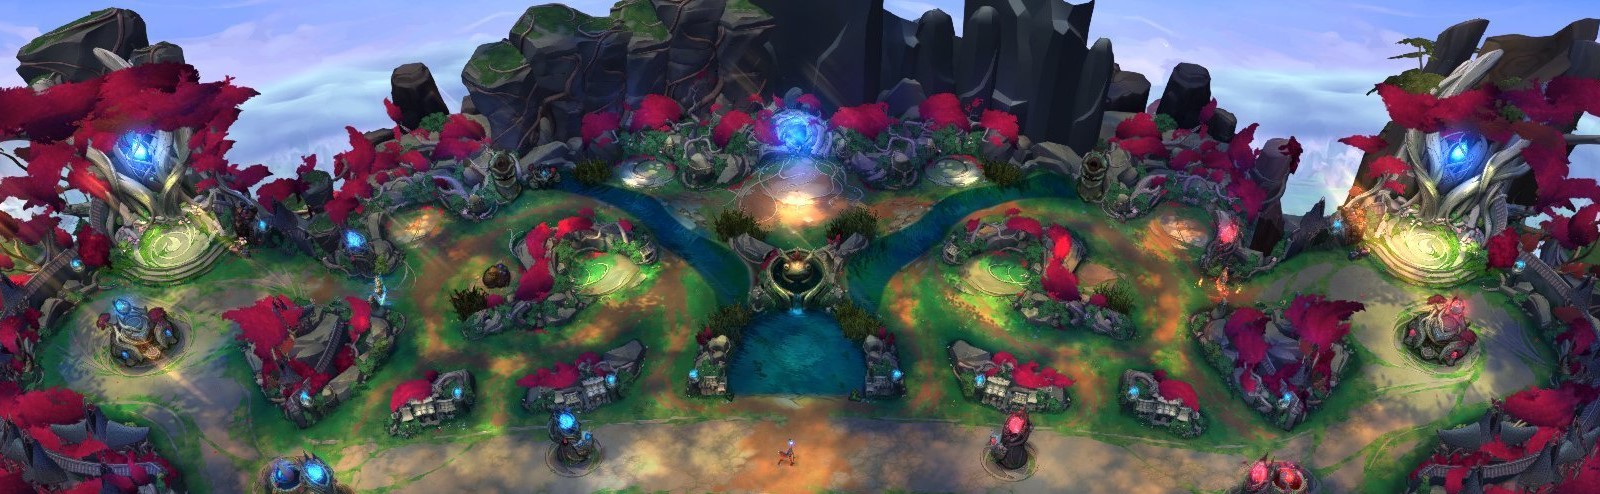 Riot Games have pulled in other studios to make games in the LoL